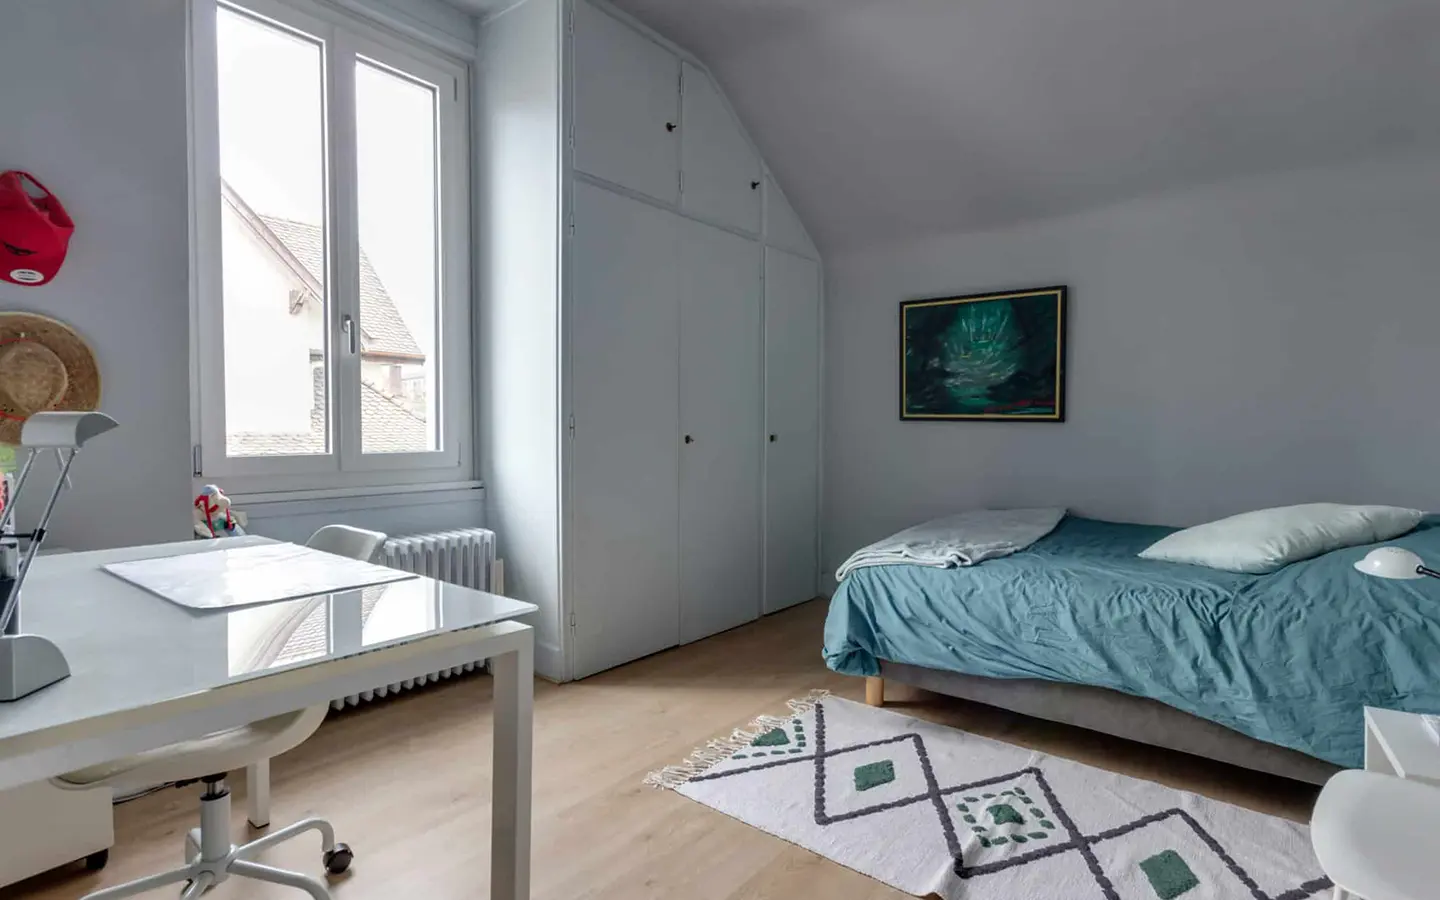 Achat immobilier maison Annecy Galeries Lafayette chambre